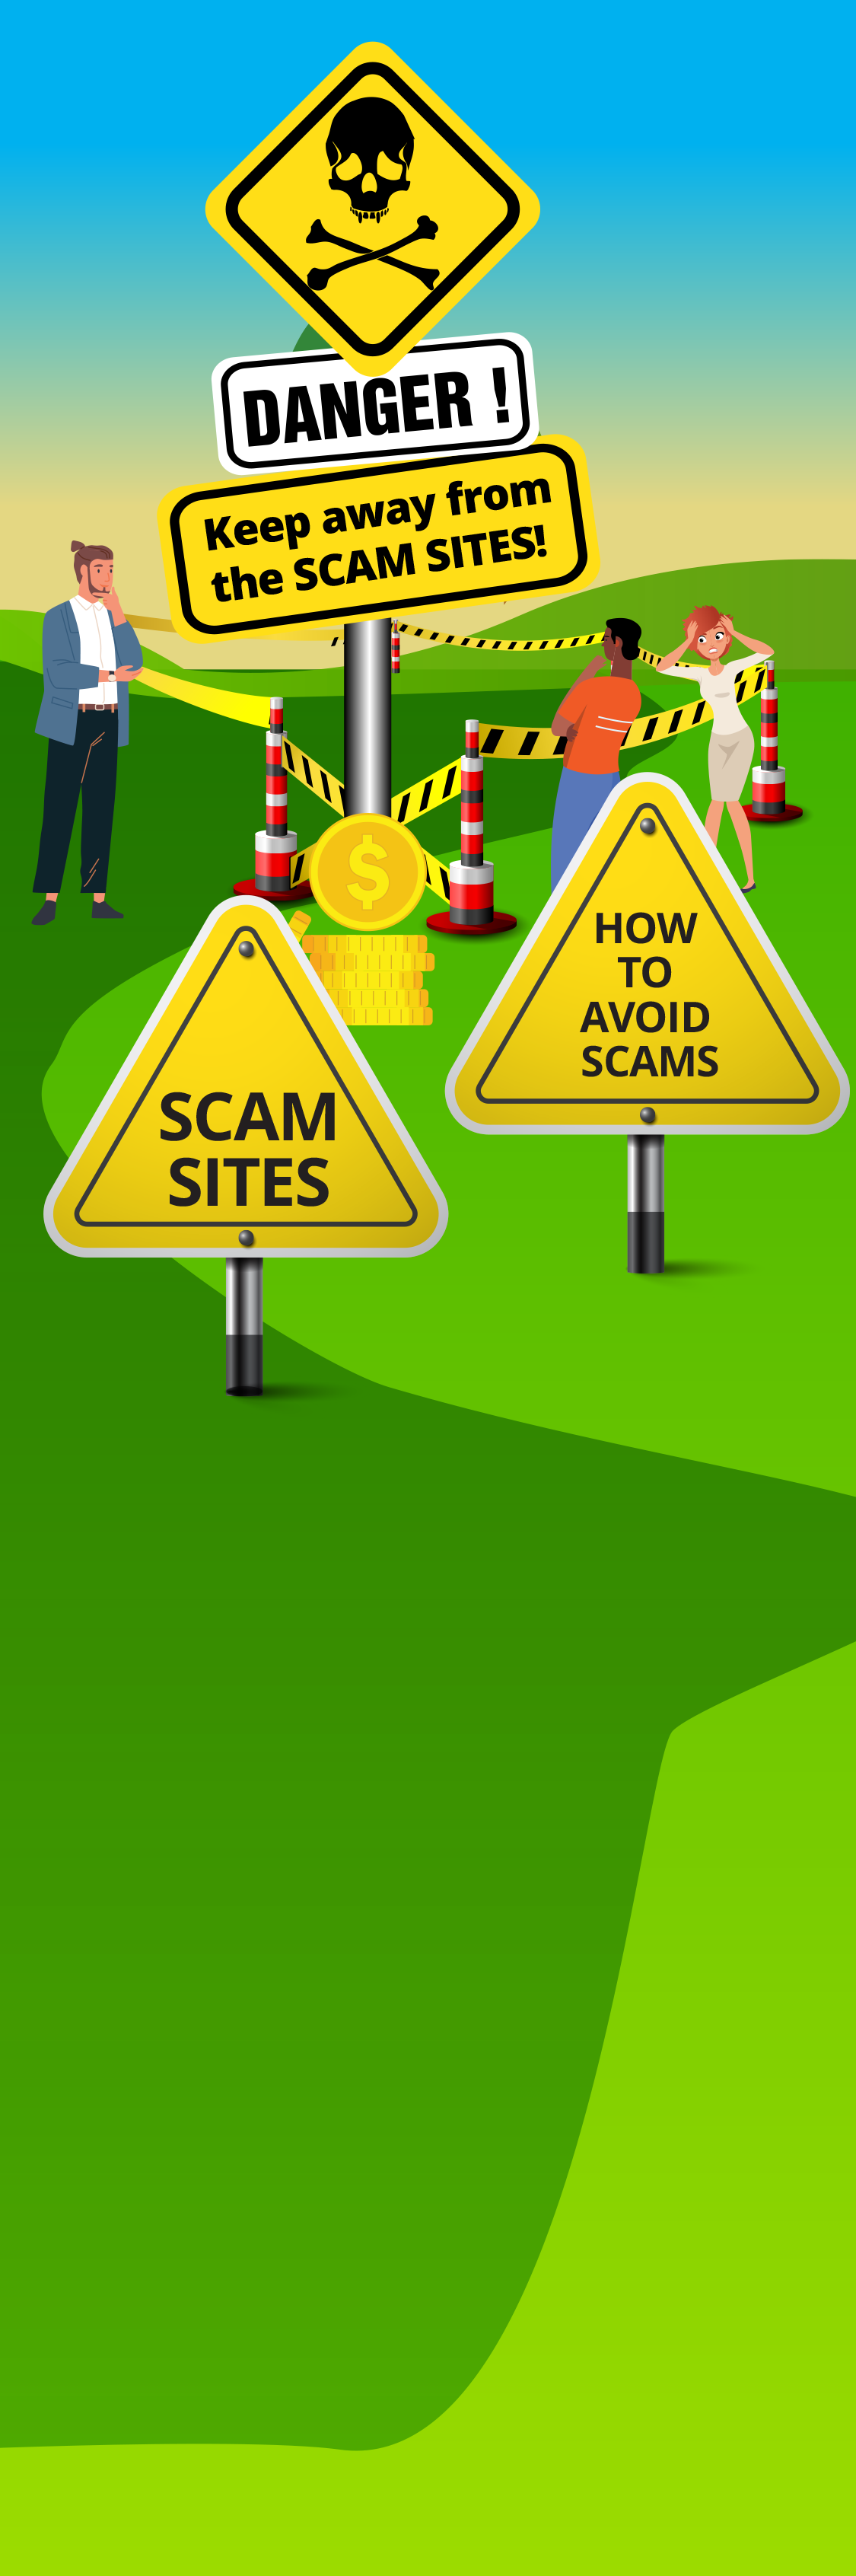 Keep away from scam sites image only 02.08.2022-7